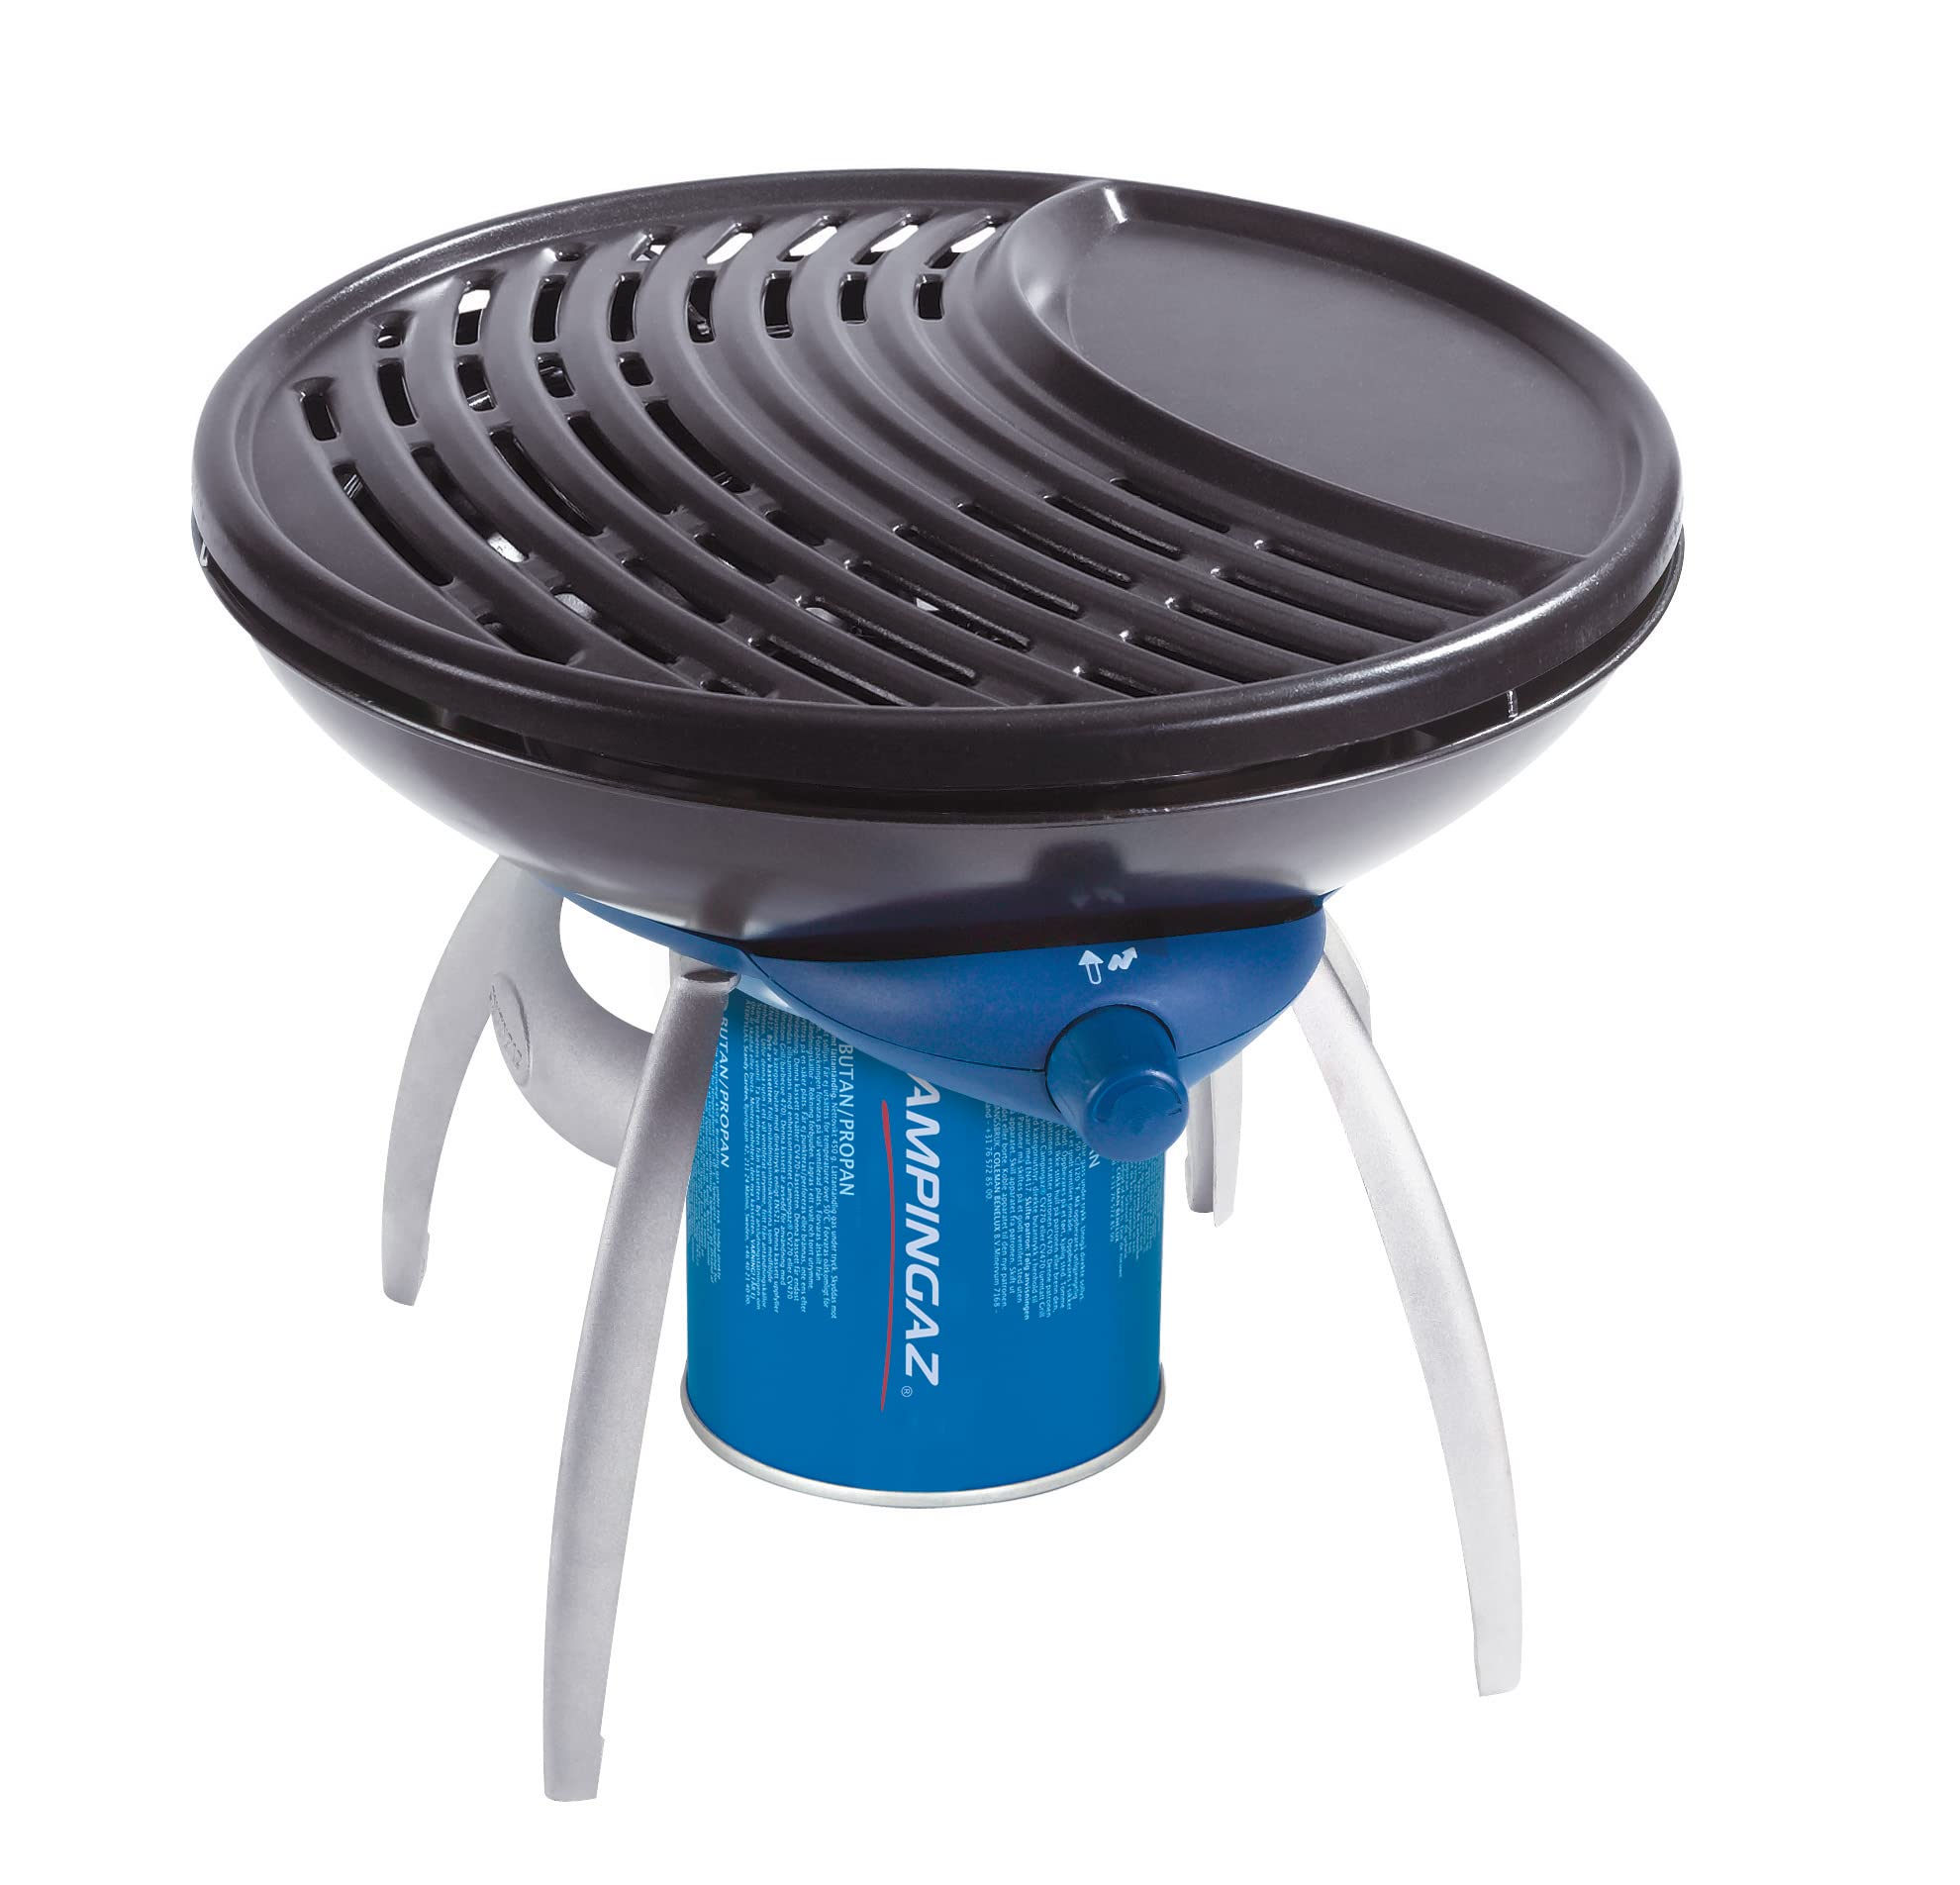 Campingaz Party Grill, Camping Stove and Grill, All-in-One Portable Camping BBQ, with Griddle, Grid and Pan Support